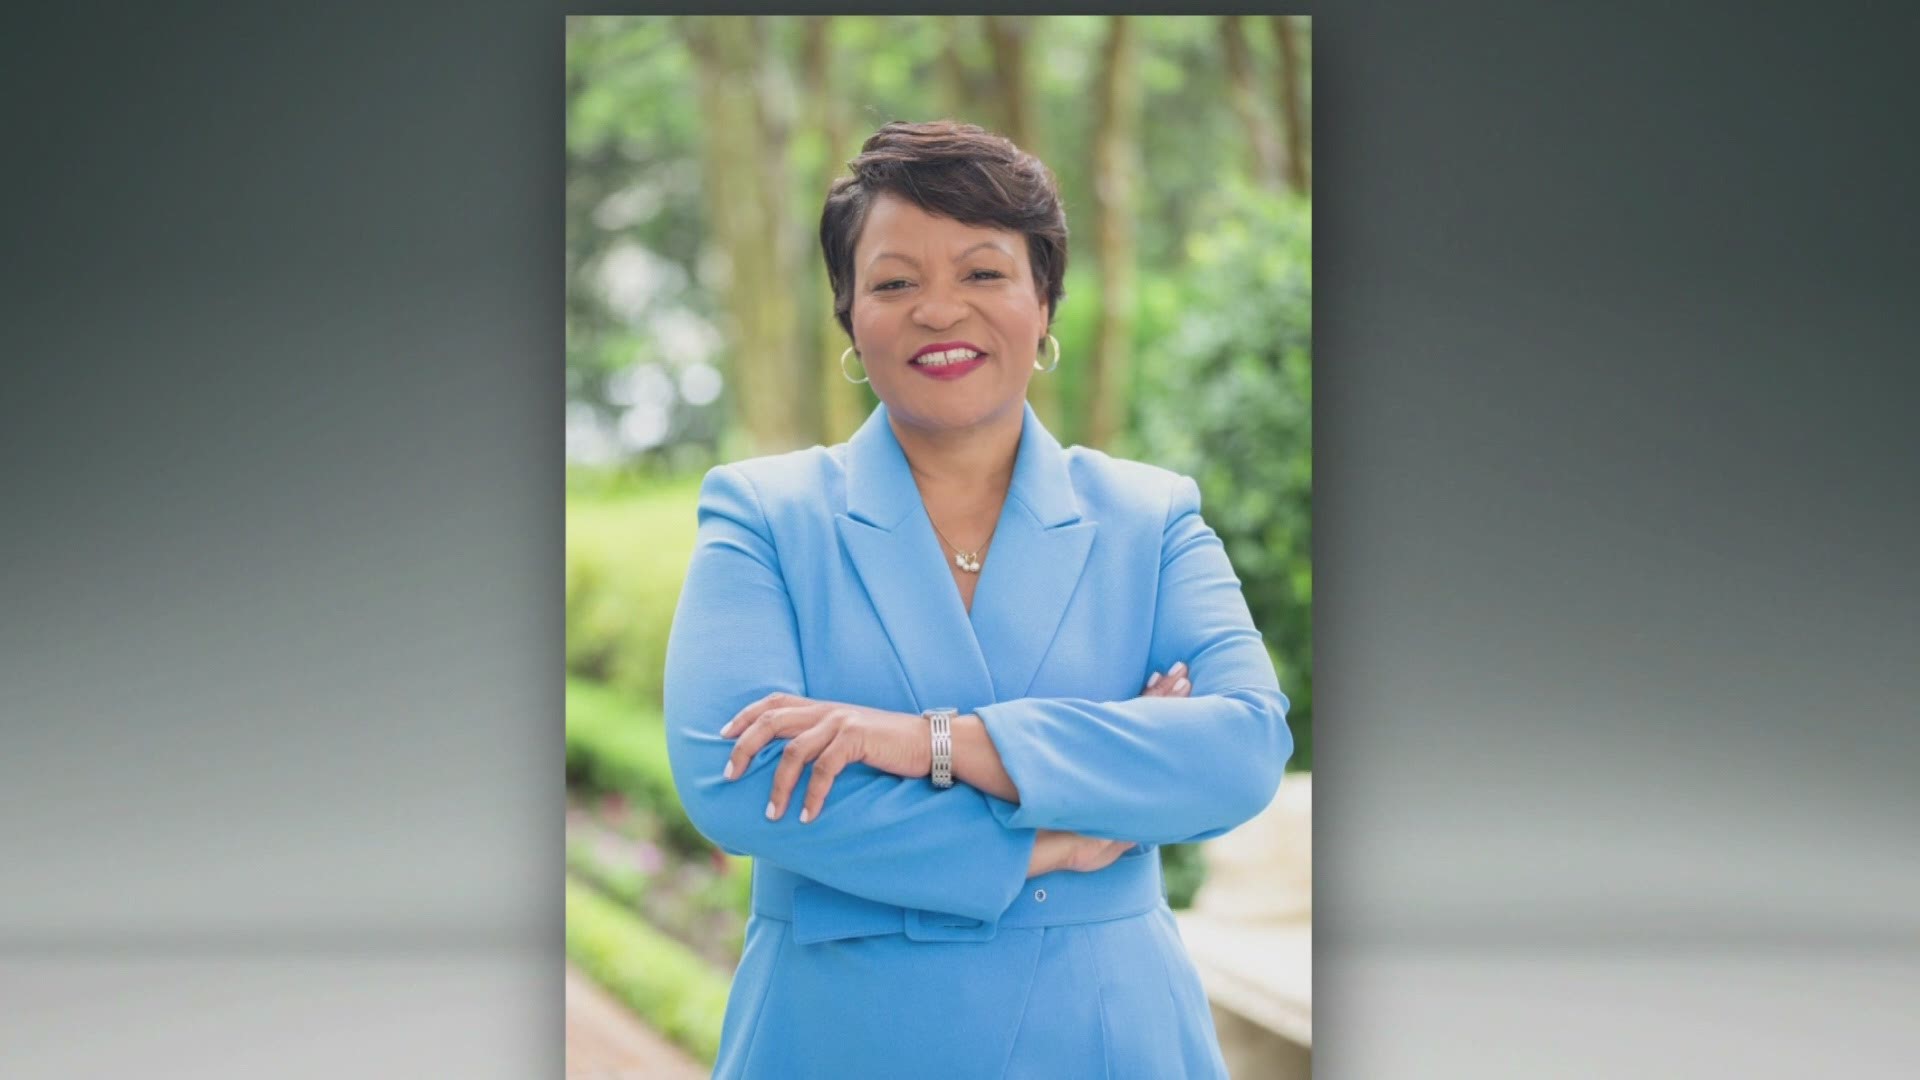 Mayor LaToya Cantrell has released an advertisement for her bid for re-election as Mayor of New Orleans.